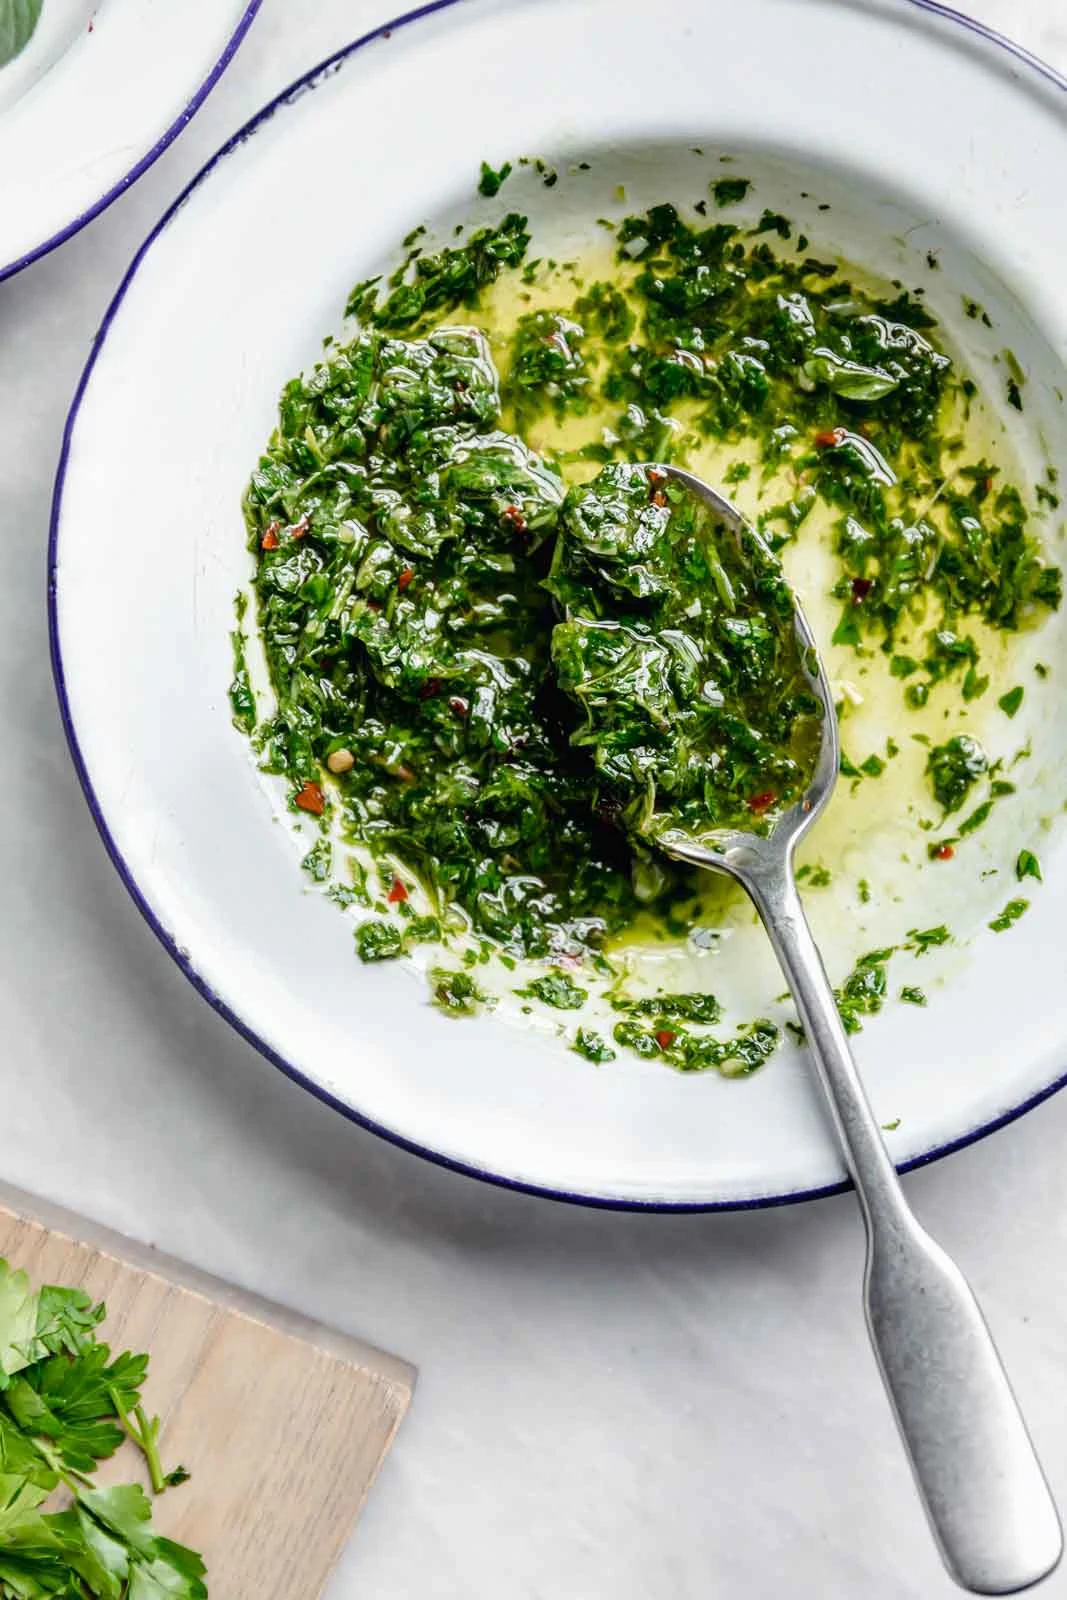 The BEST Chimichurri recipe made with all the traditional ingredients plus cilantro, lime & honey. Not to toot my own horn, but this green chimichurri is damn good.